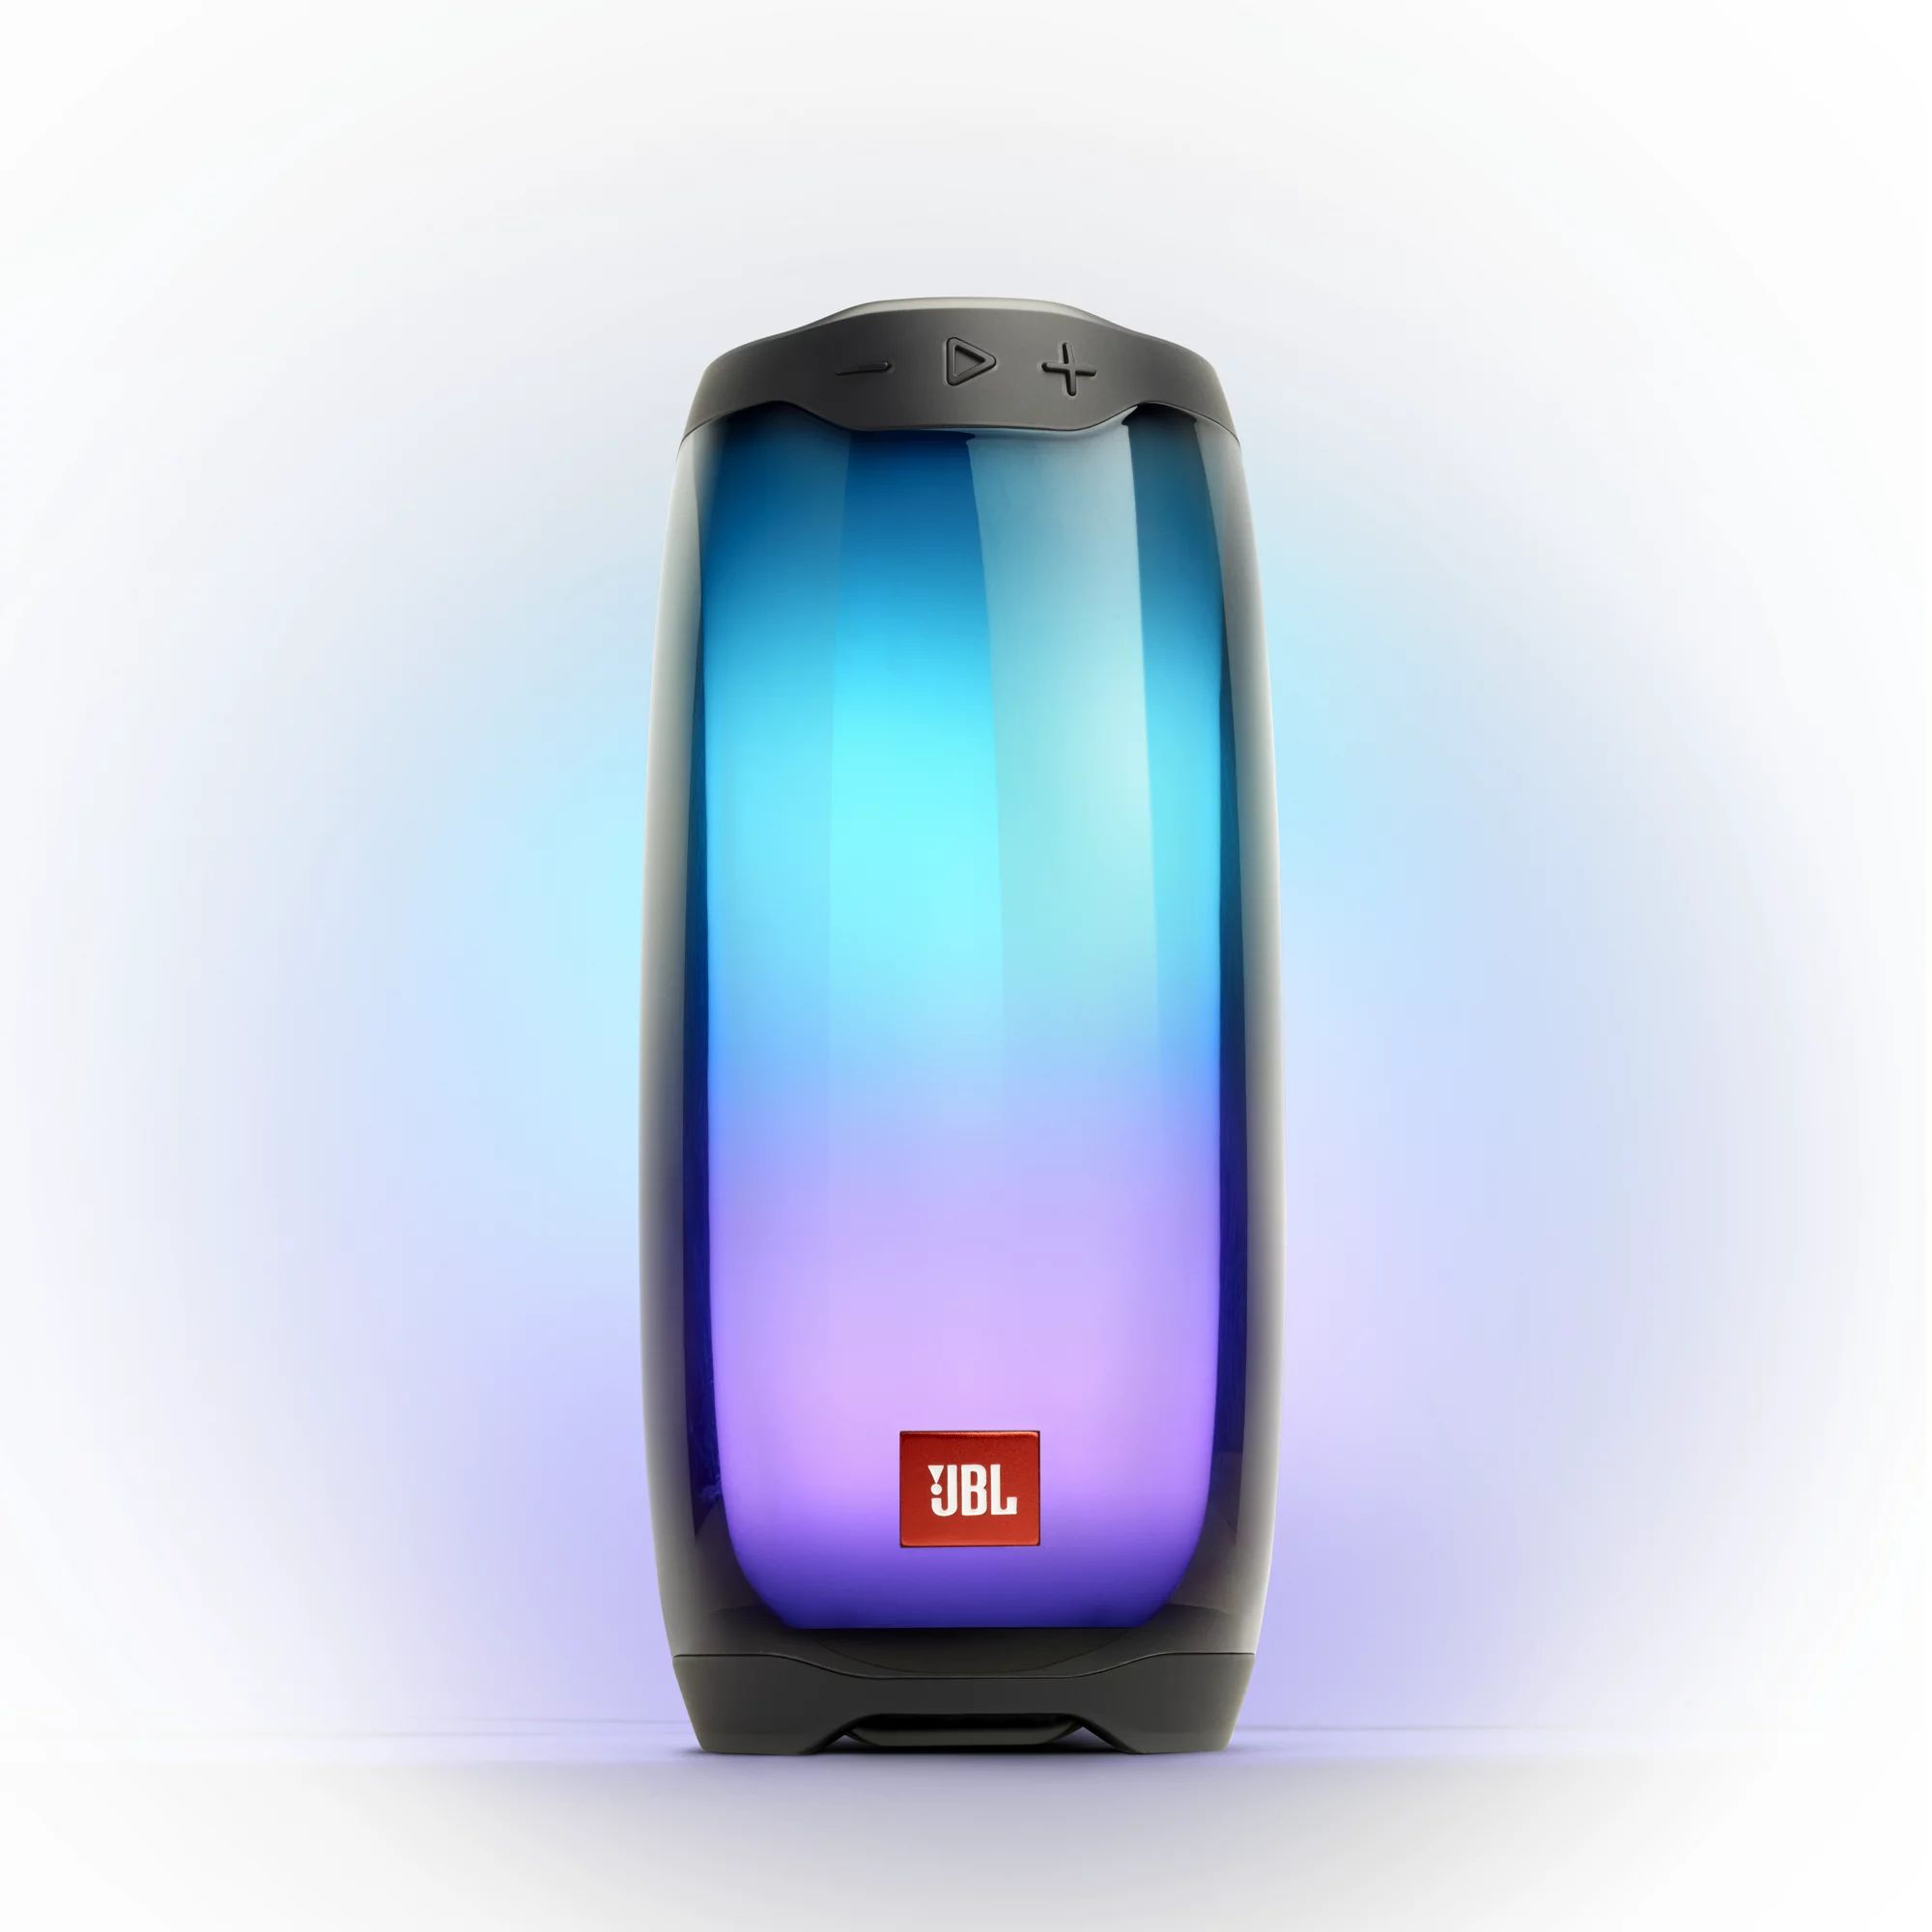 JBL Pulse 4 Waterproof Portable Bluetooth Speaker with Light Show and Sound - Black | Walmart (US)